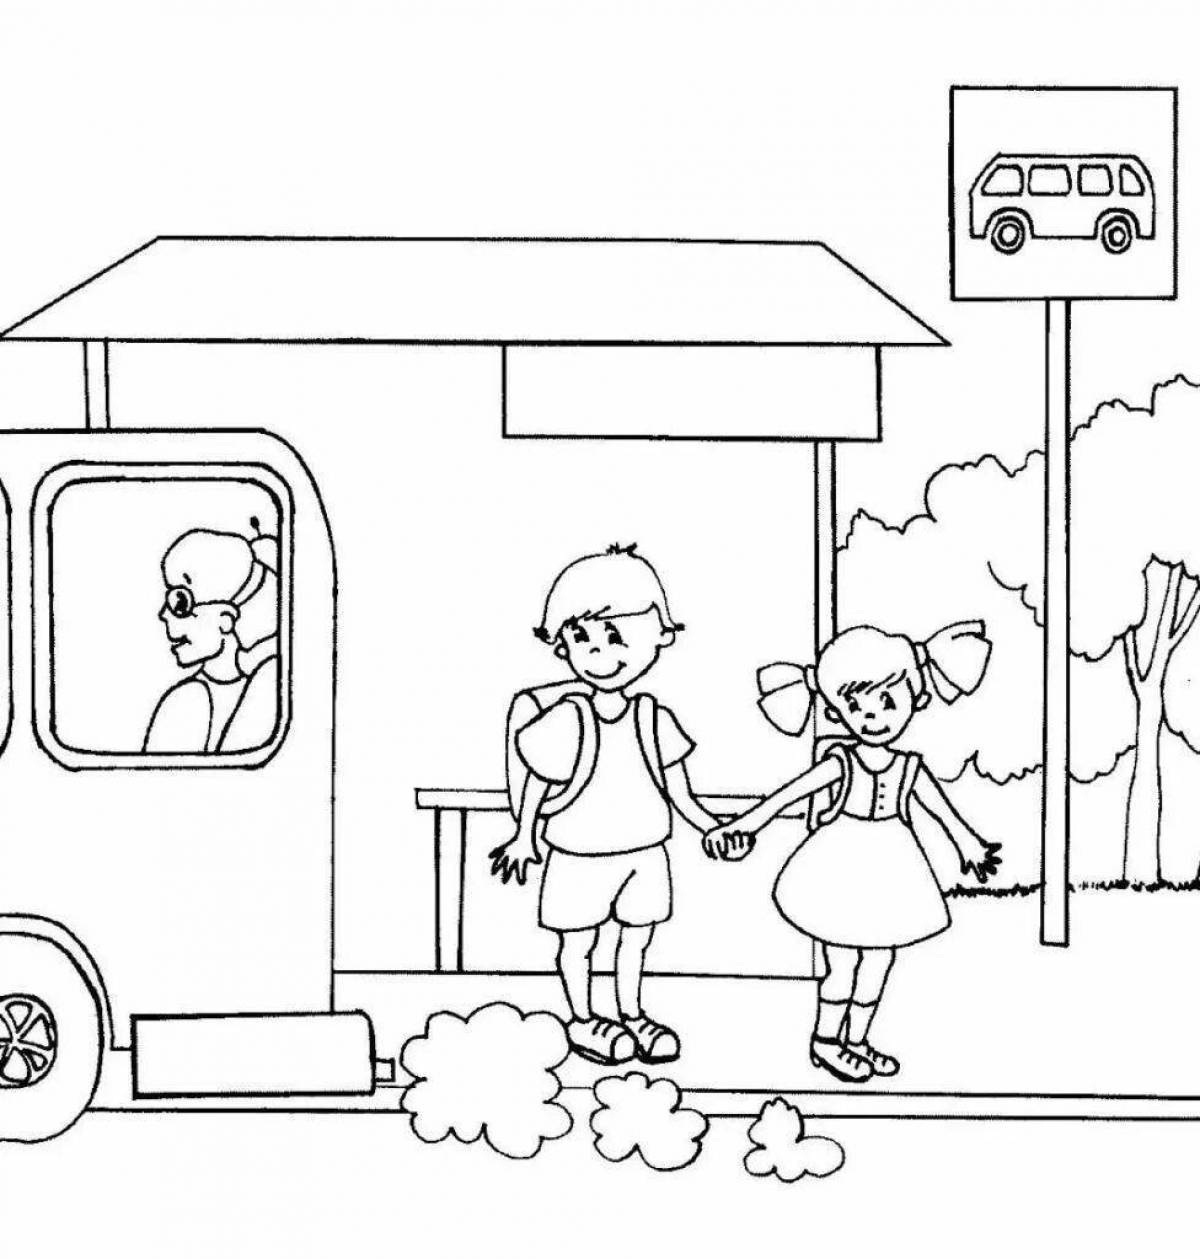 Drawings for kids traffic rules for kids #9